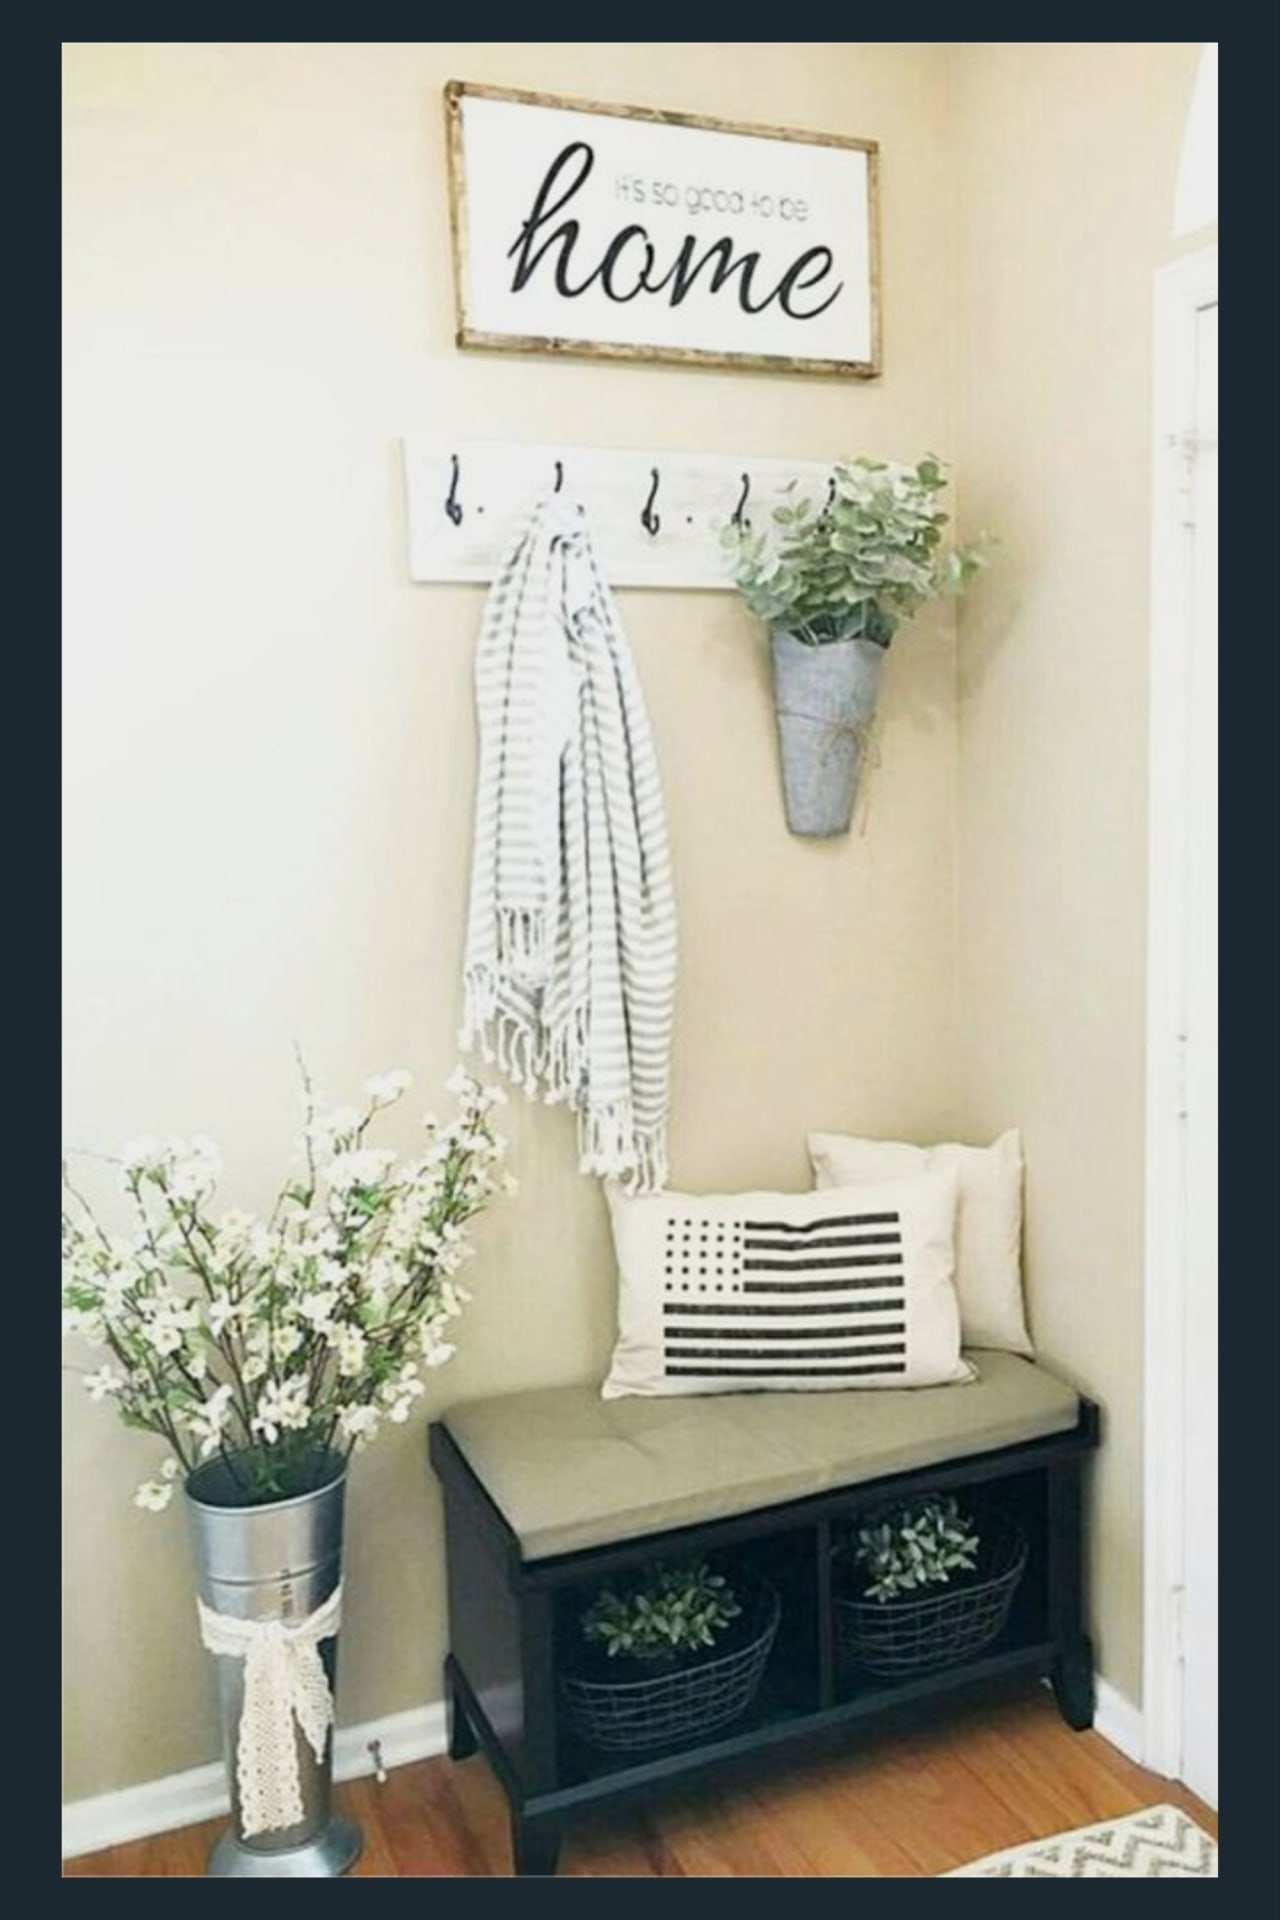 Foyer decorating ideas - Small cottage farmhouse foyer decorating ideas - love this small corner entryway decor - perfect for a small house or small apartment entry